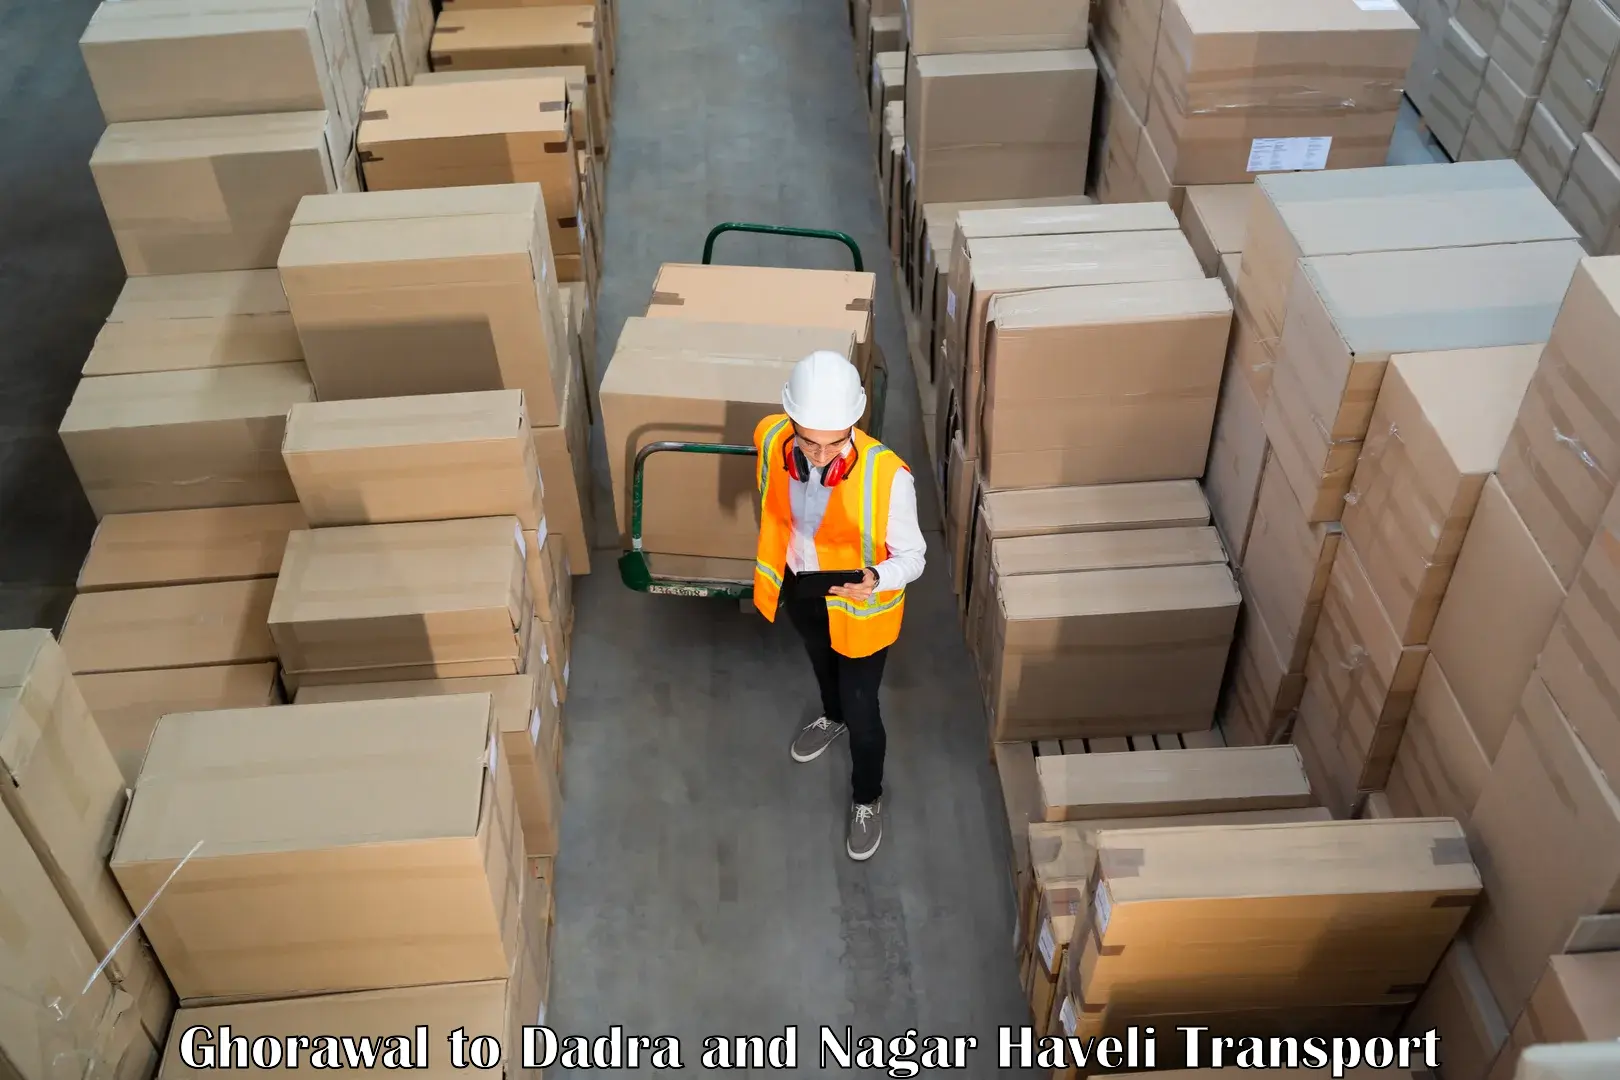 Truck transport companies in India Ghorawal to Dadra and Nagar Haveli